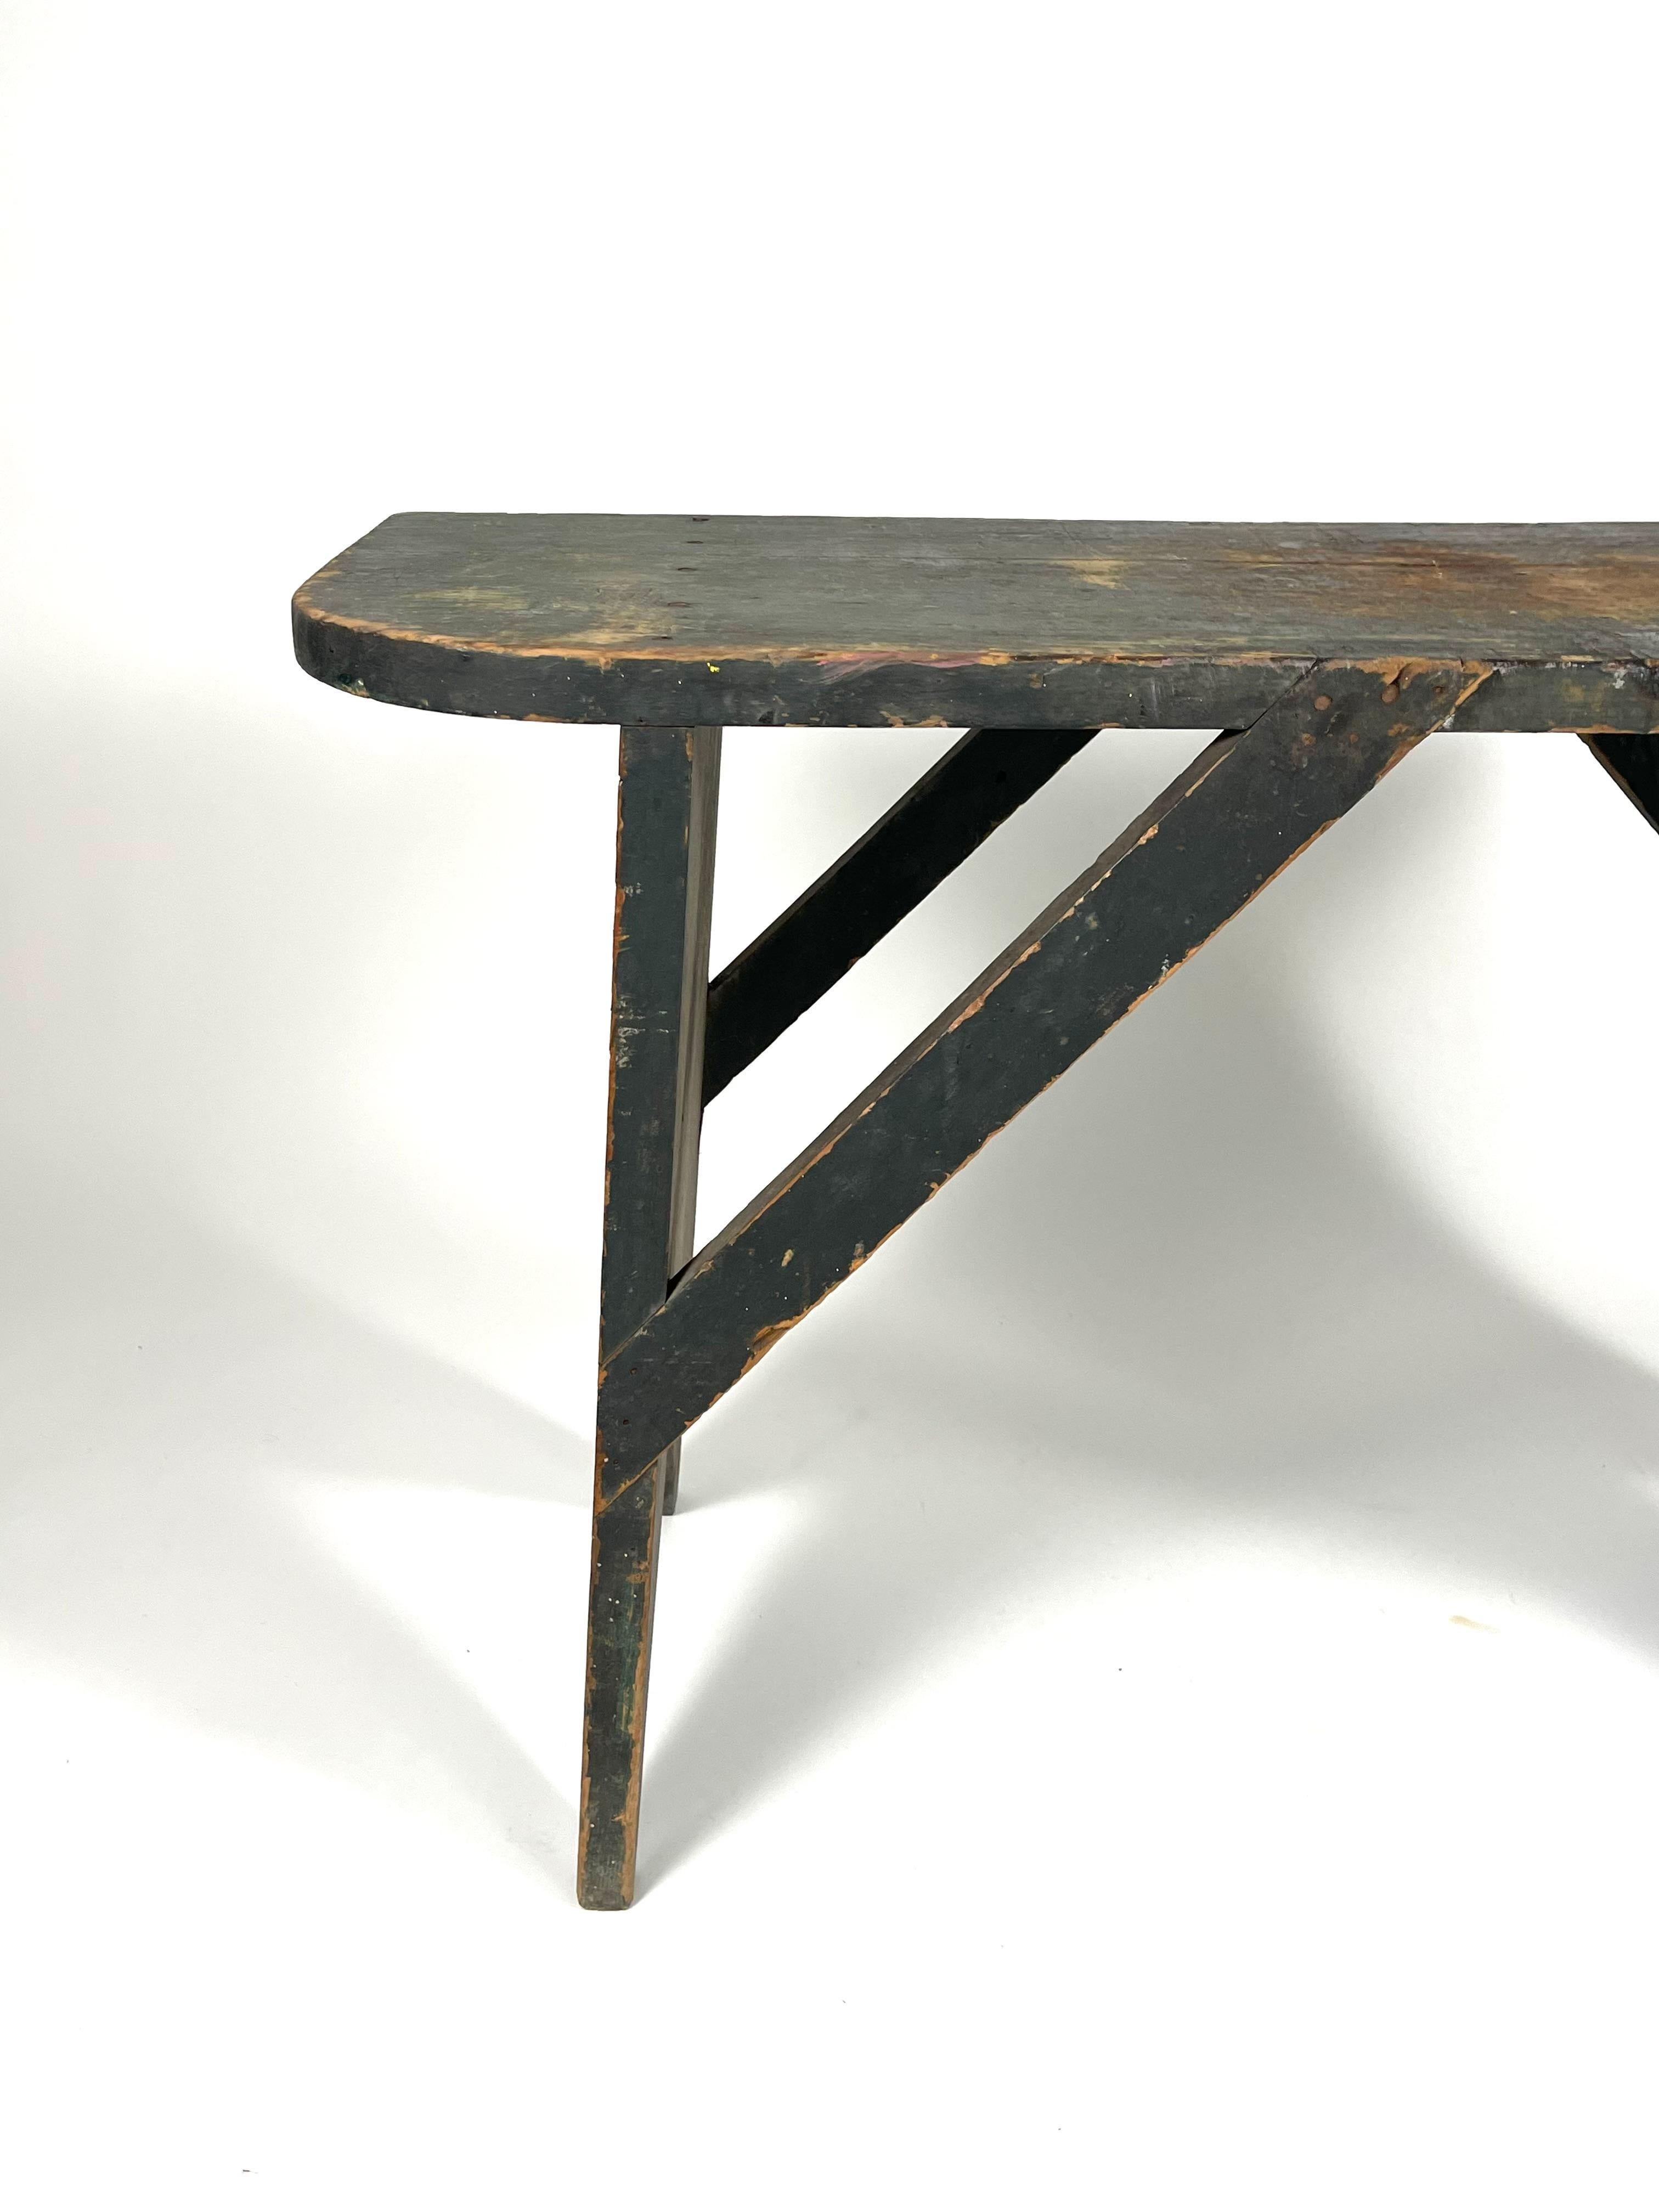 A 19th century bucket bench in old green paint of rectangular form with curved ends, the sawtooth cut plank legs joined by diagonal cross stretchers. Wonderful graphic form and useful both as a bench or a table.
Historically, a bucket bench was